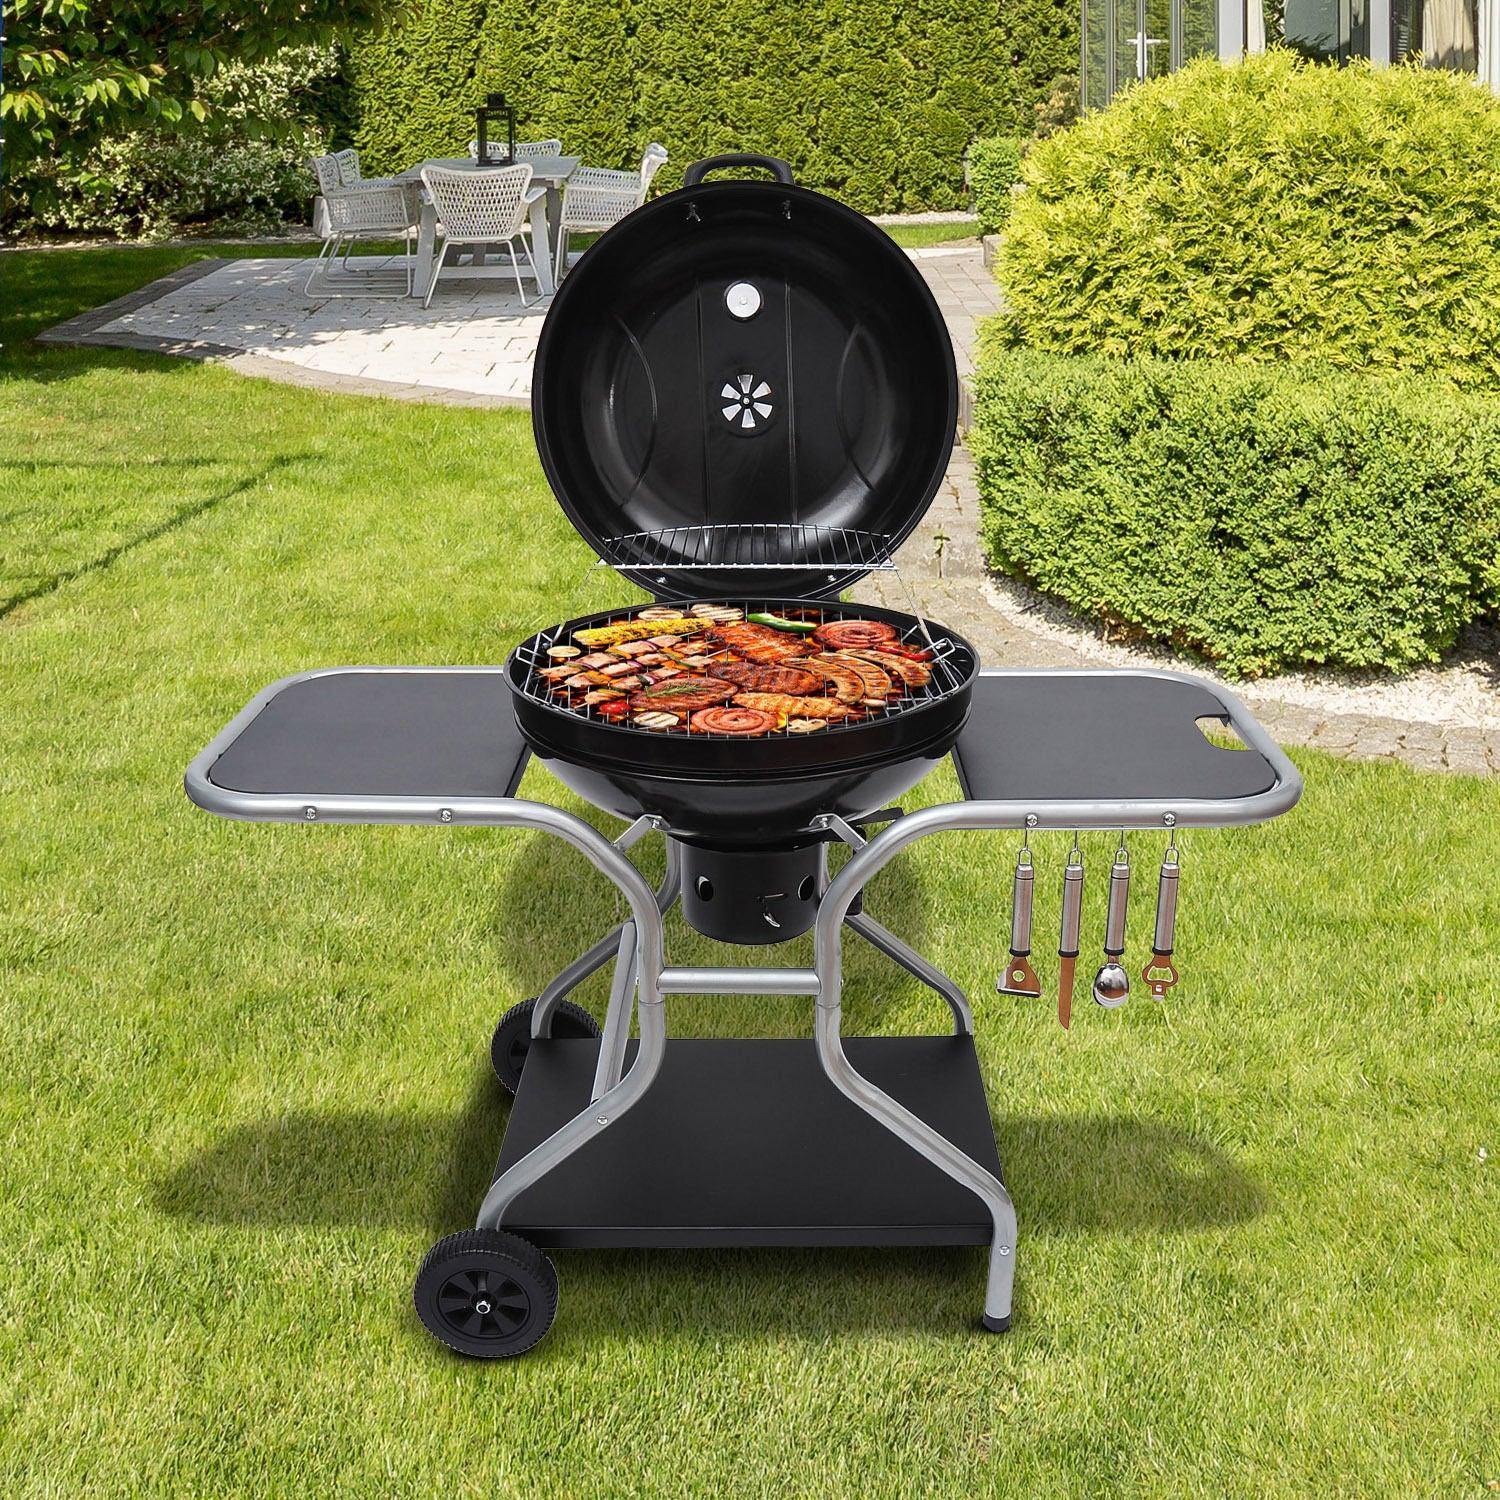 Portable BBQ Charcoal Kettle Grill - Sports, Wine & Gadgets